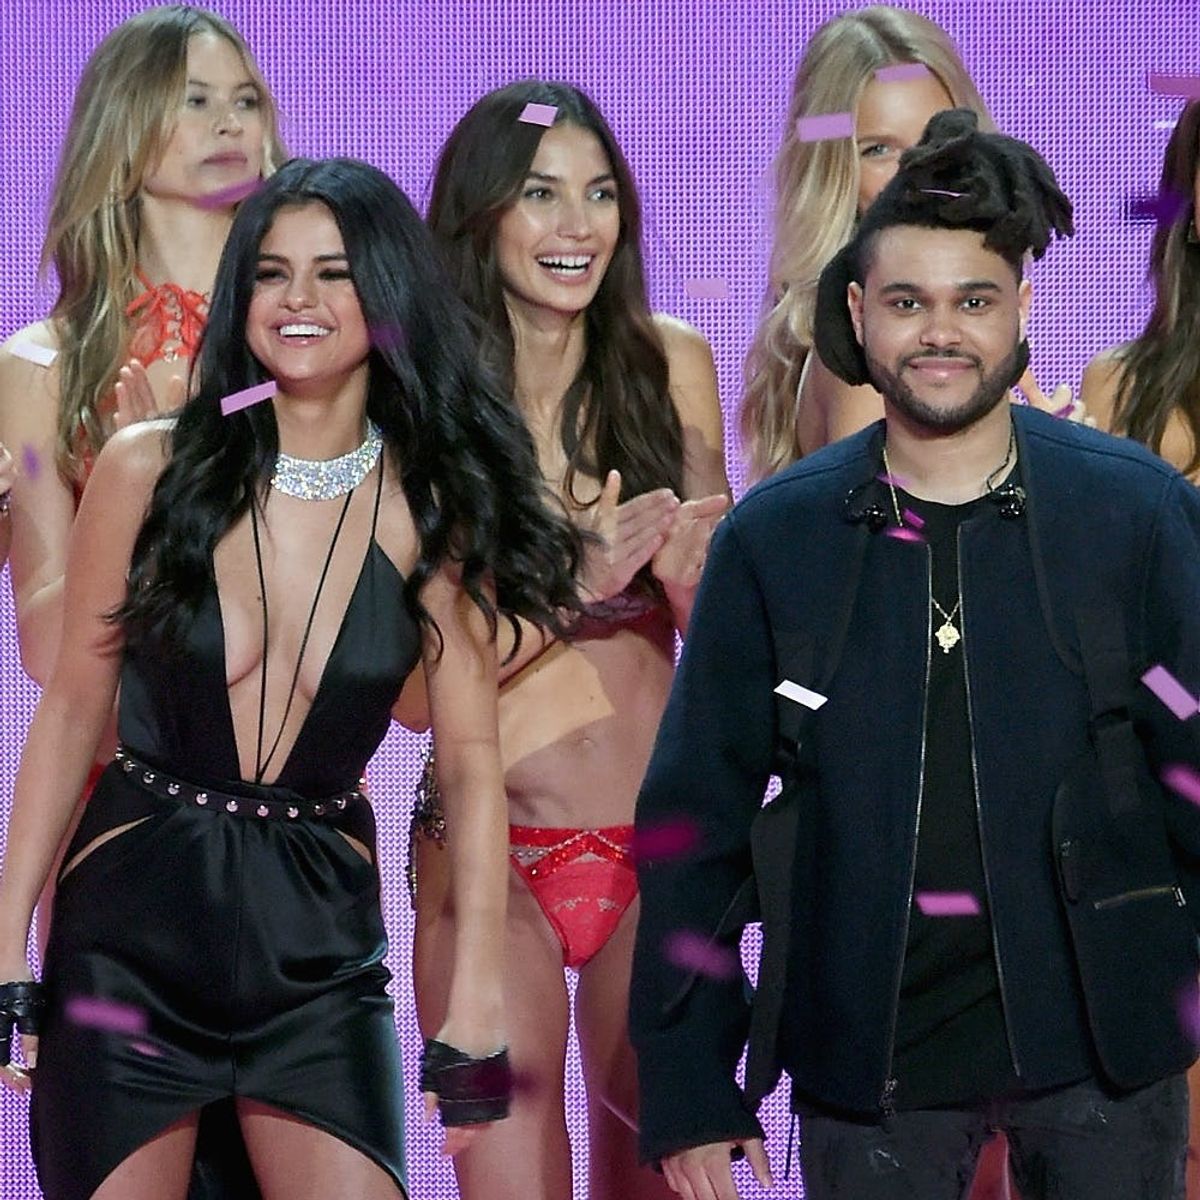 Selena Gomez Confirmed Her Feelings for The Weeknd With a Now-Deleted Instagram Post